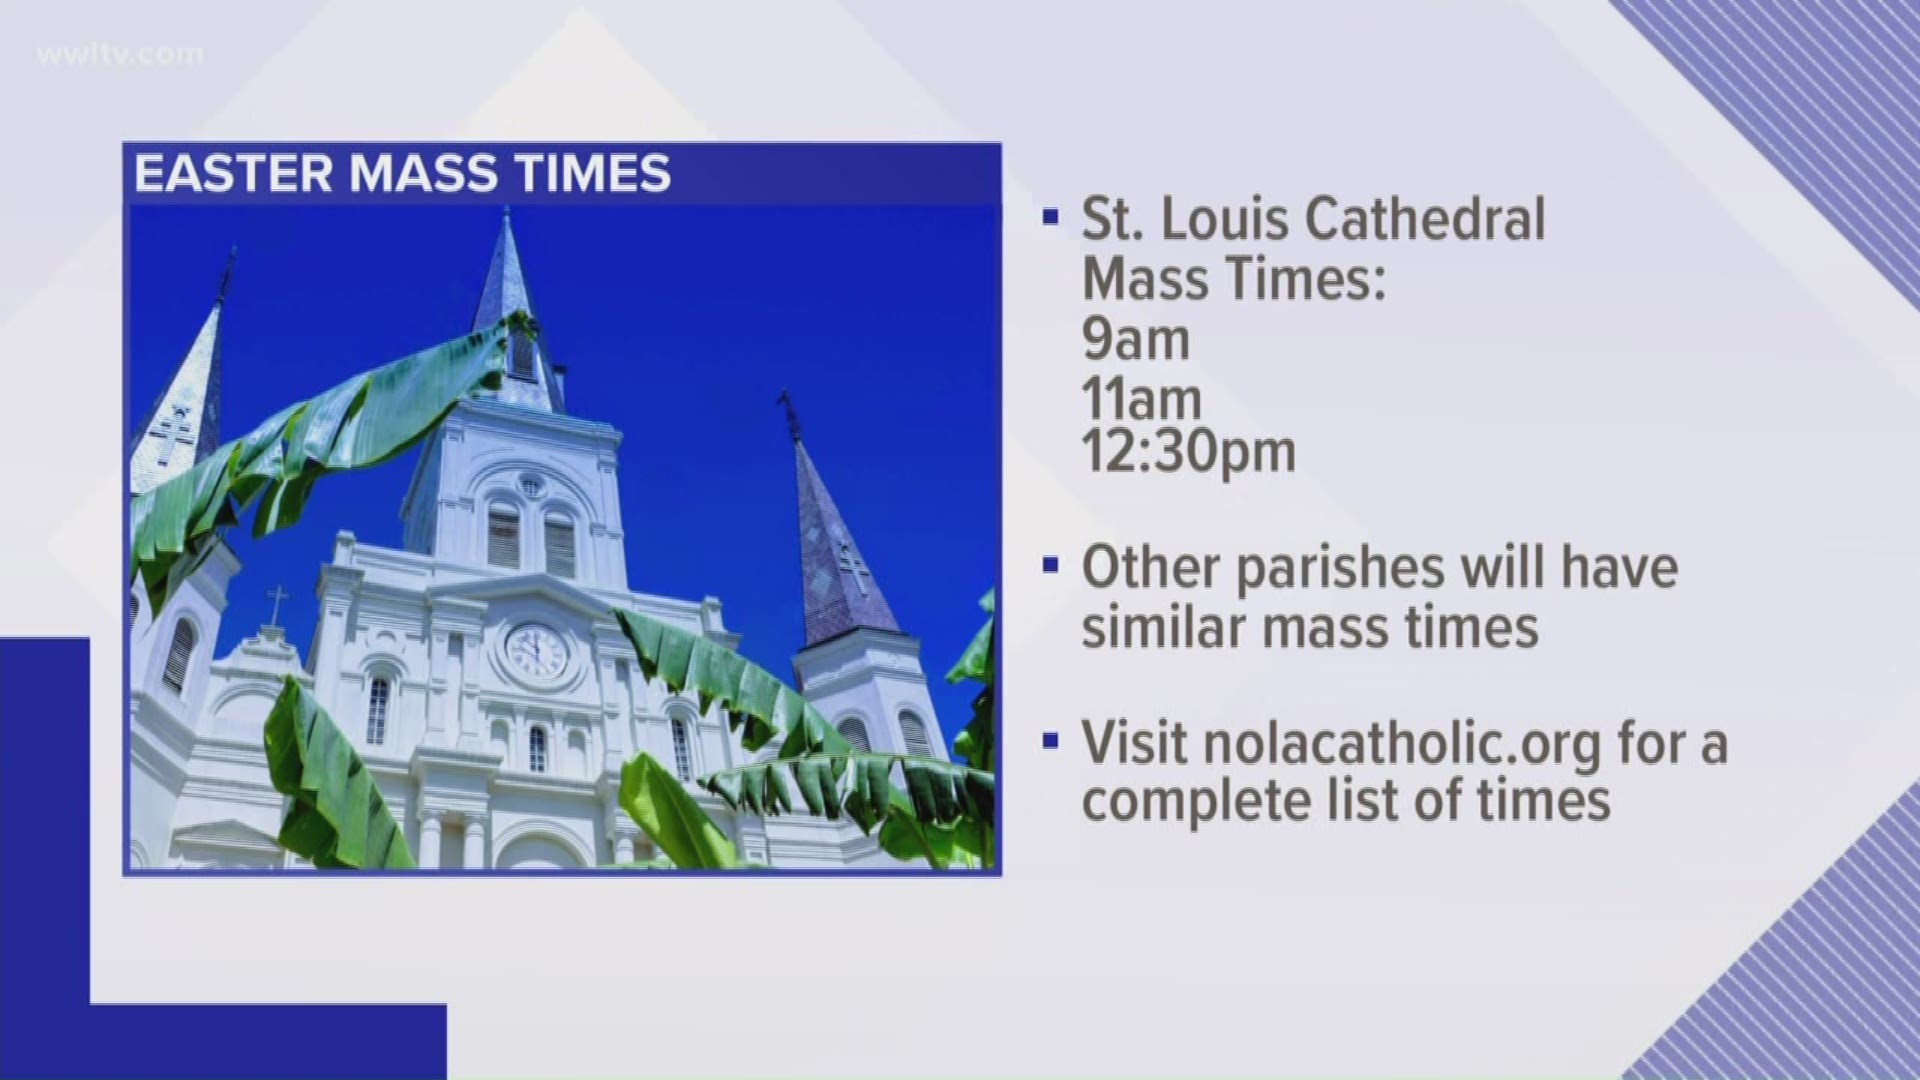 Here's the information you need to know to enjoy your Easter around New Orleans!